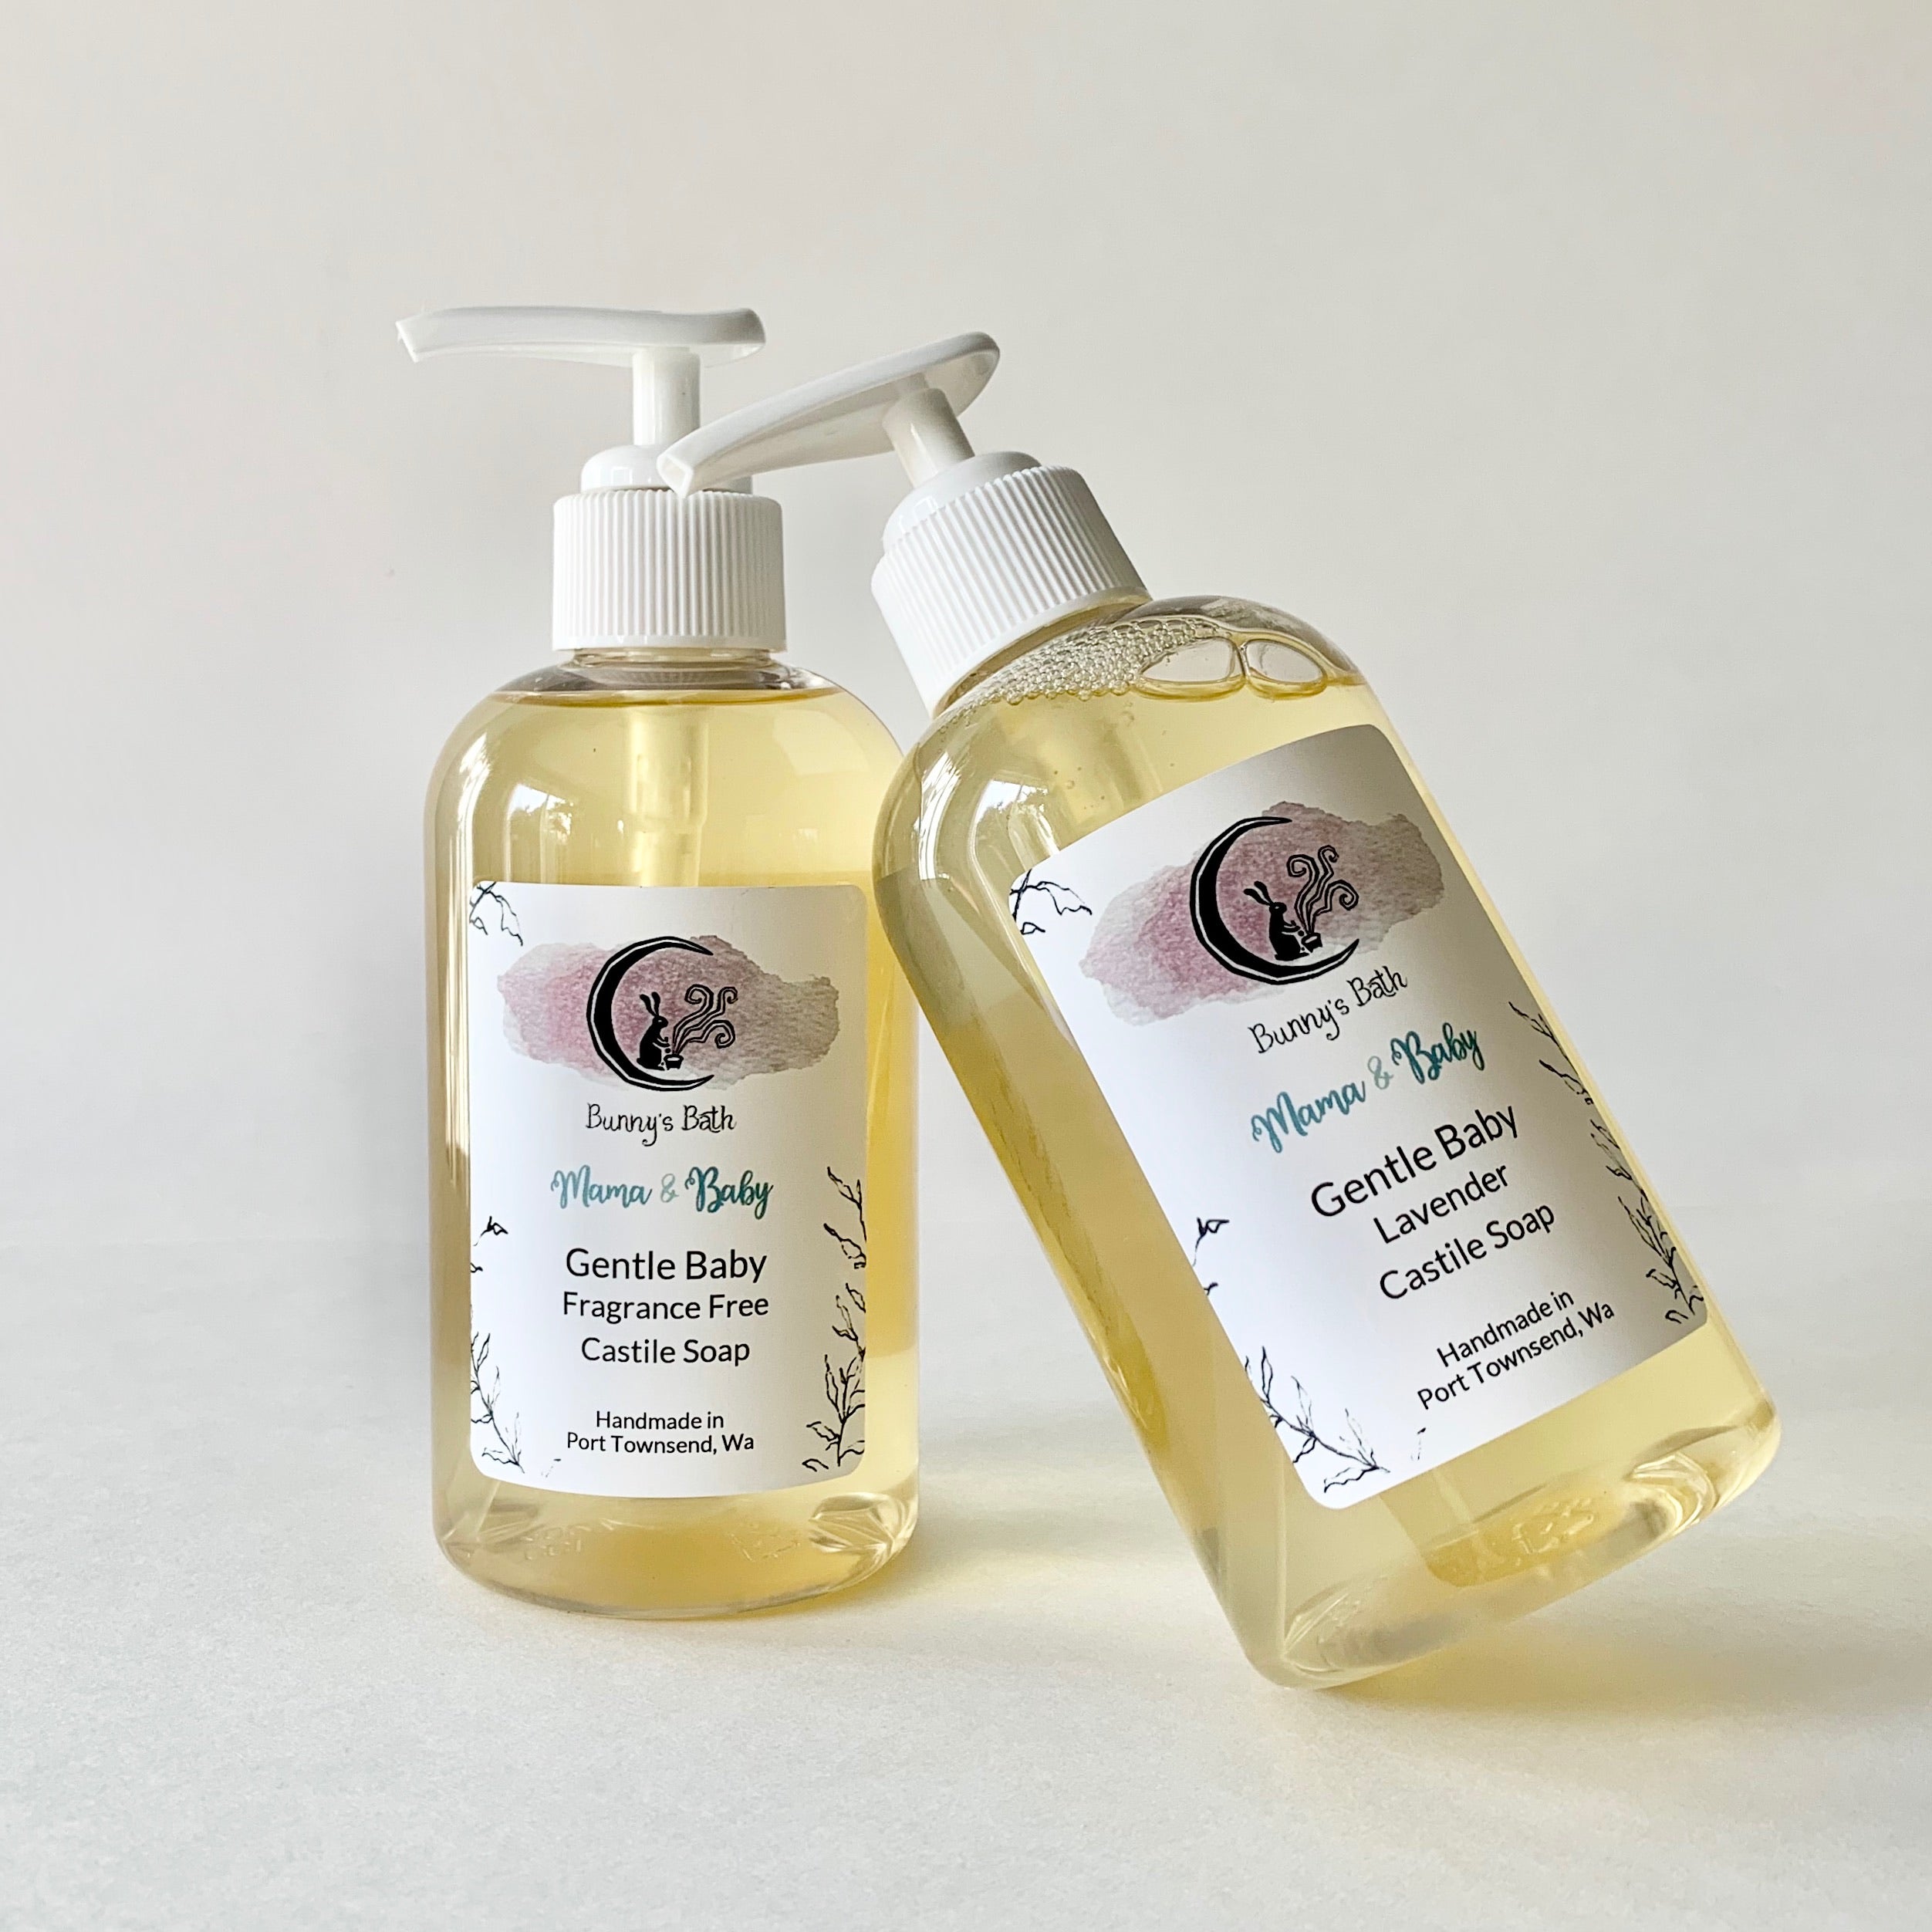 Castile Soap For Baby Bath : 16 Best Baby Shampoos Washes And Soaps / A soap that is made entirely (100%) from olive oil named after the castile region in spain where the soap is said to have first originated.